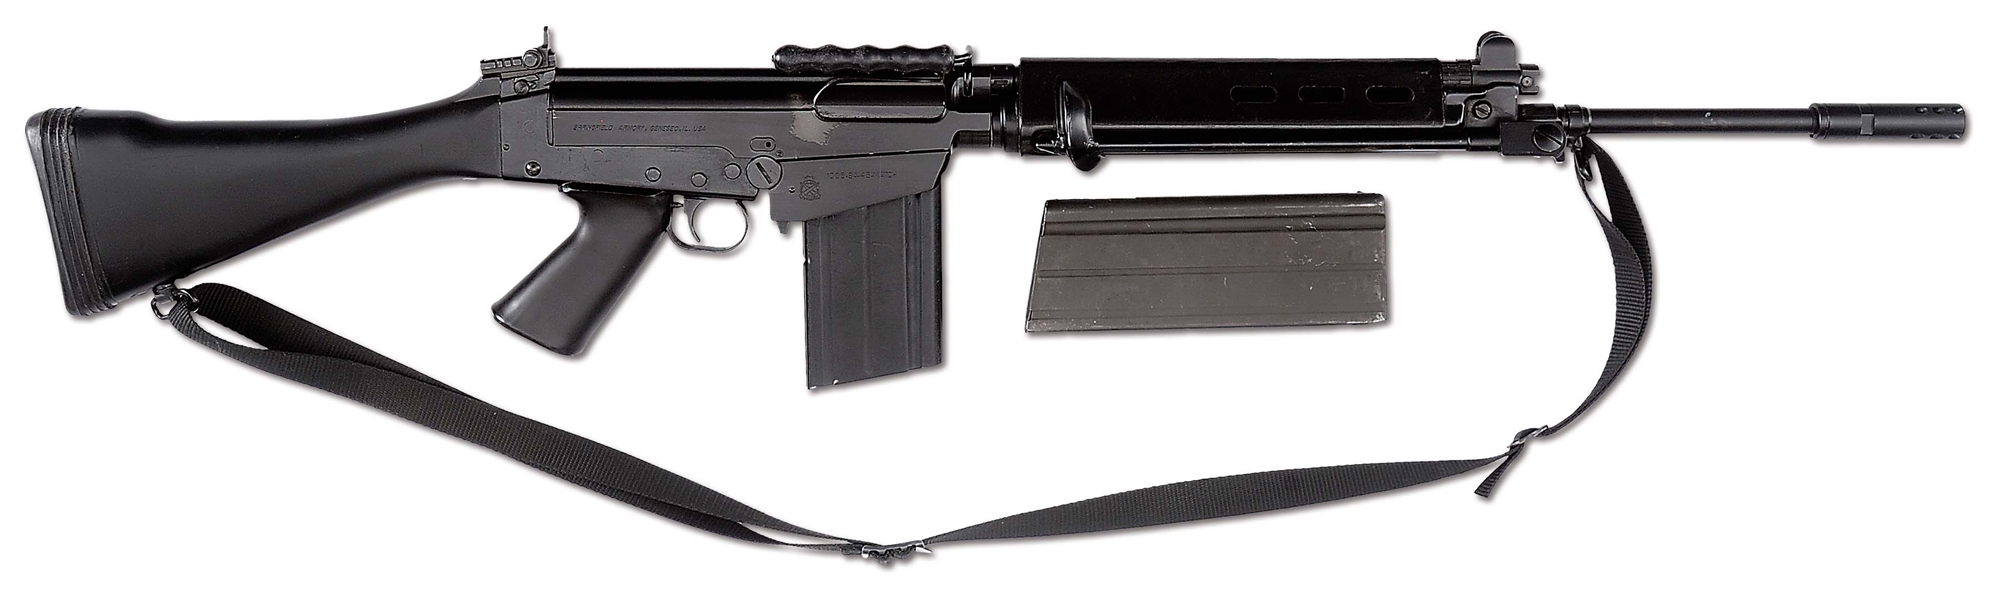 (N) HIGH CONDITION BRAZILIAN MANUFACTURED FN-FAL MATCH GRADE MACHINE GUN AS REGISTERED BY SPRINGFIELD ARMORY (FULLY TRANSFERABLE)